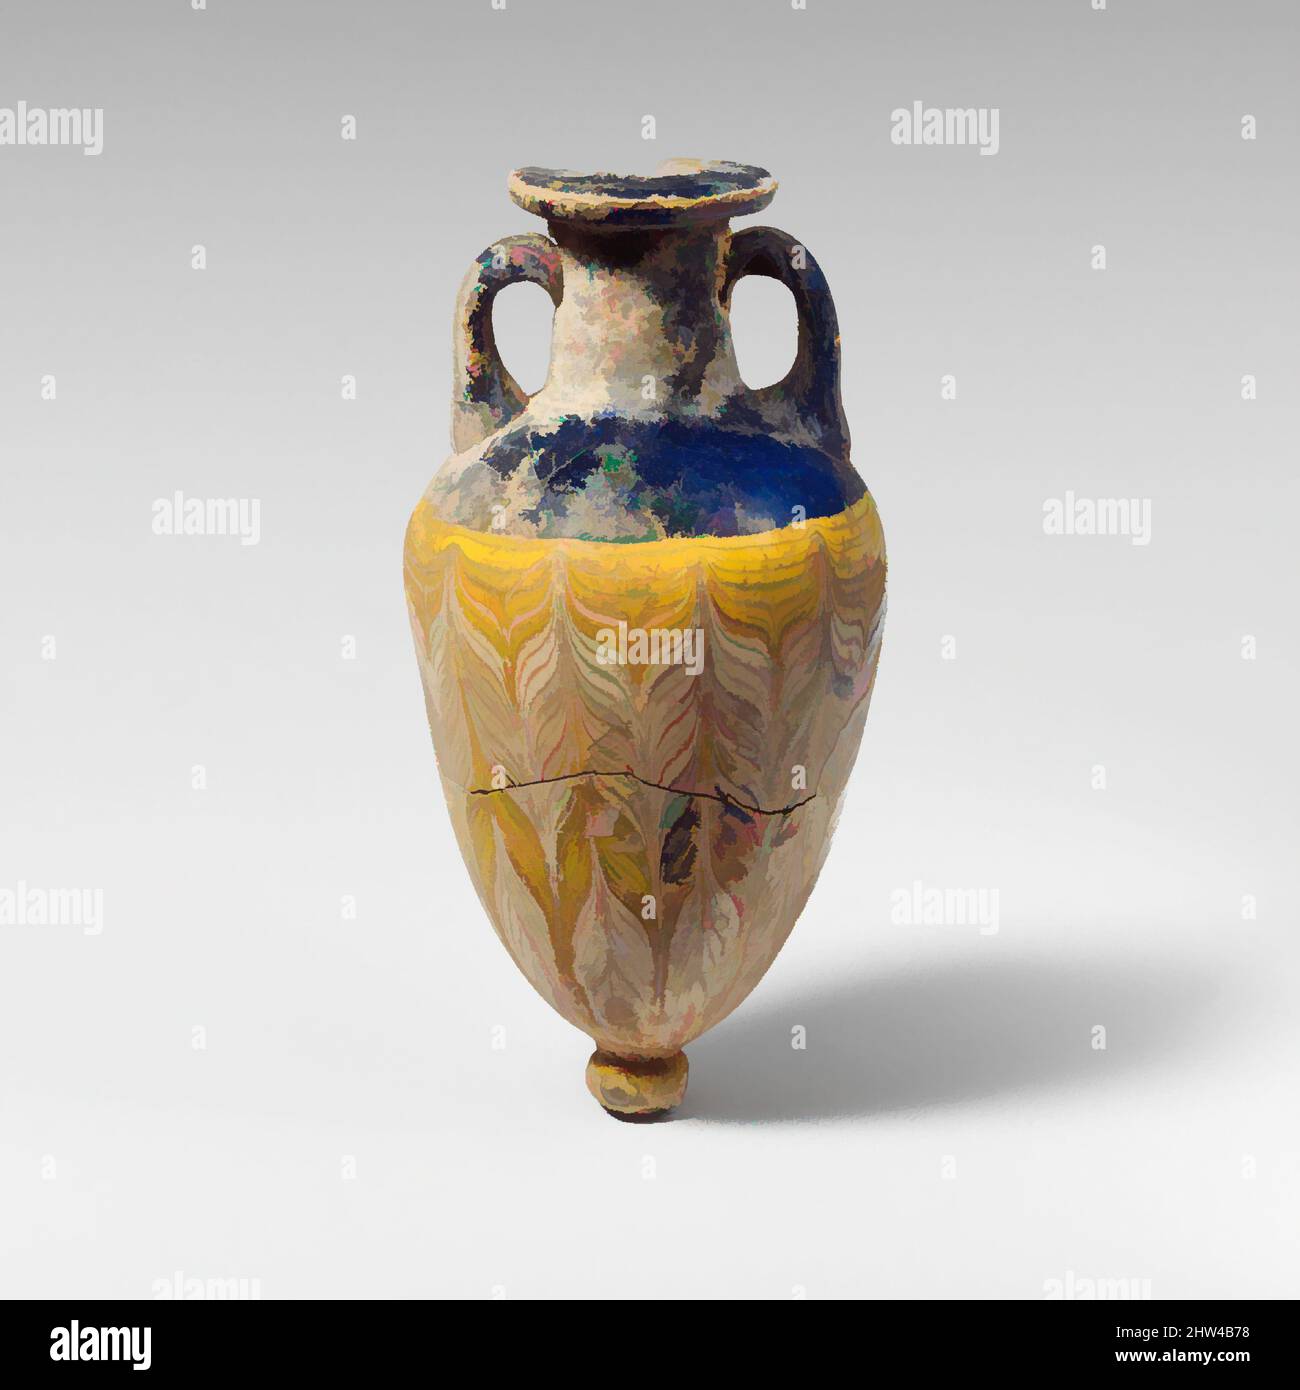 Art inspired by Glass amphoriskos (perfume bottle), Late Classical or Hellenistic, 4th–3rd century B.C., Greek, Eastern Mediterranean or Italian, Glass; core-formed, Group II, H.: 4 3/8 in. (11.1 cm), Glass, Translucent cobalt blue, with handles and base-knob in same color; trails in, Classic works modernized by Artotop with a splash of modernity. Shapes, color and value, eye-catching visual impact on art. Emotions through freedom of artworks in a contemporary way. A timeless message pursuing a wildly creative new direction. Artists turning to the digital medium and creating the Artotop NFT Stock Photo